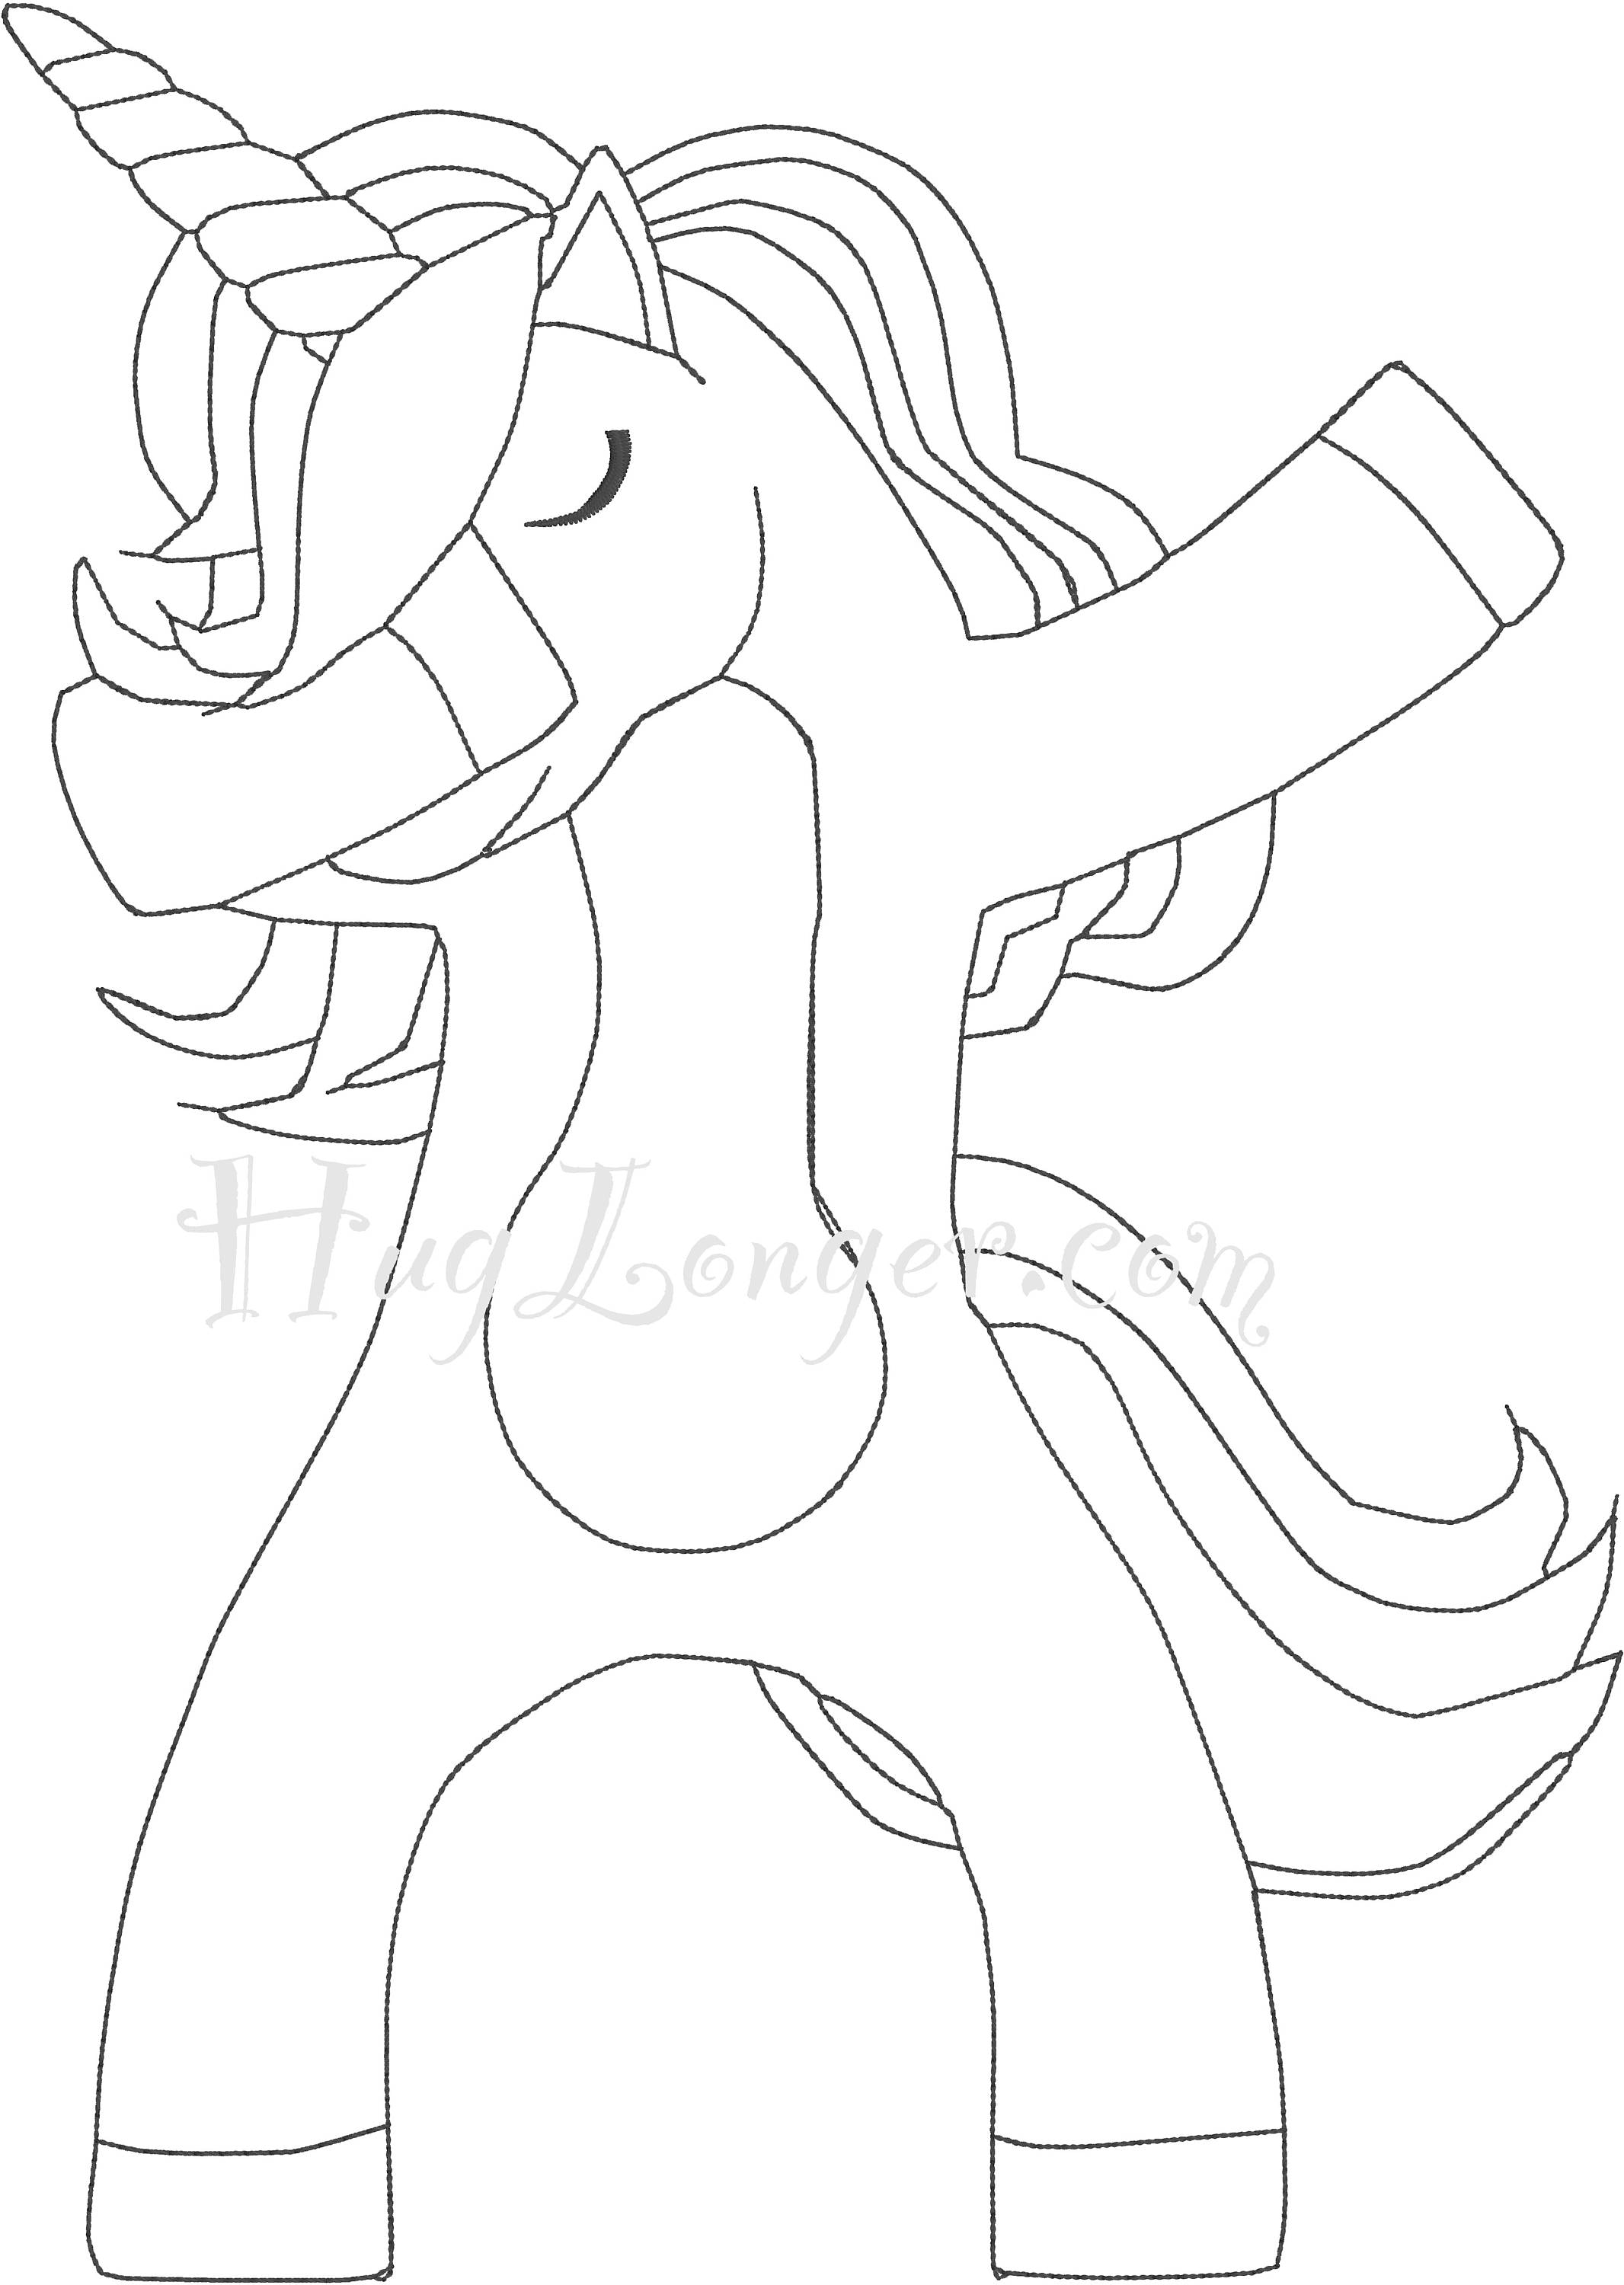 Embroidered Line Art Unicorn HL2145 embroidery file